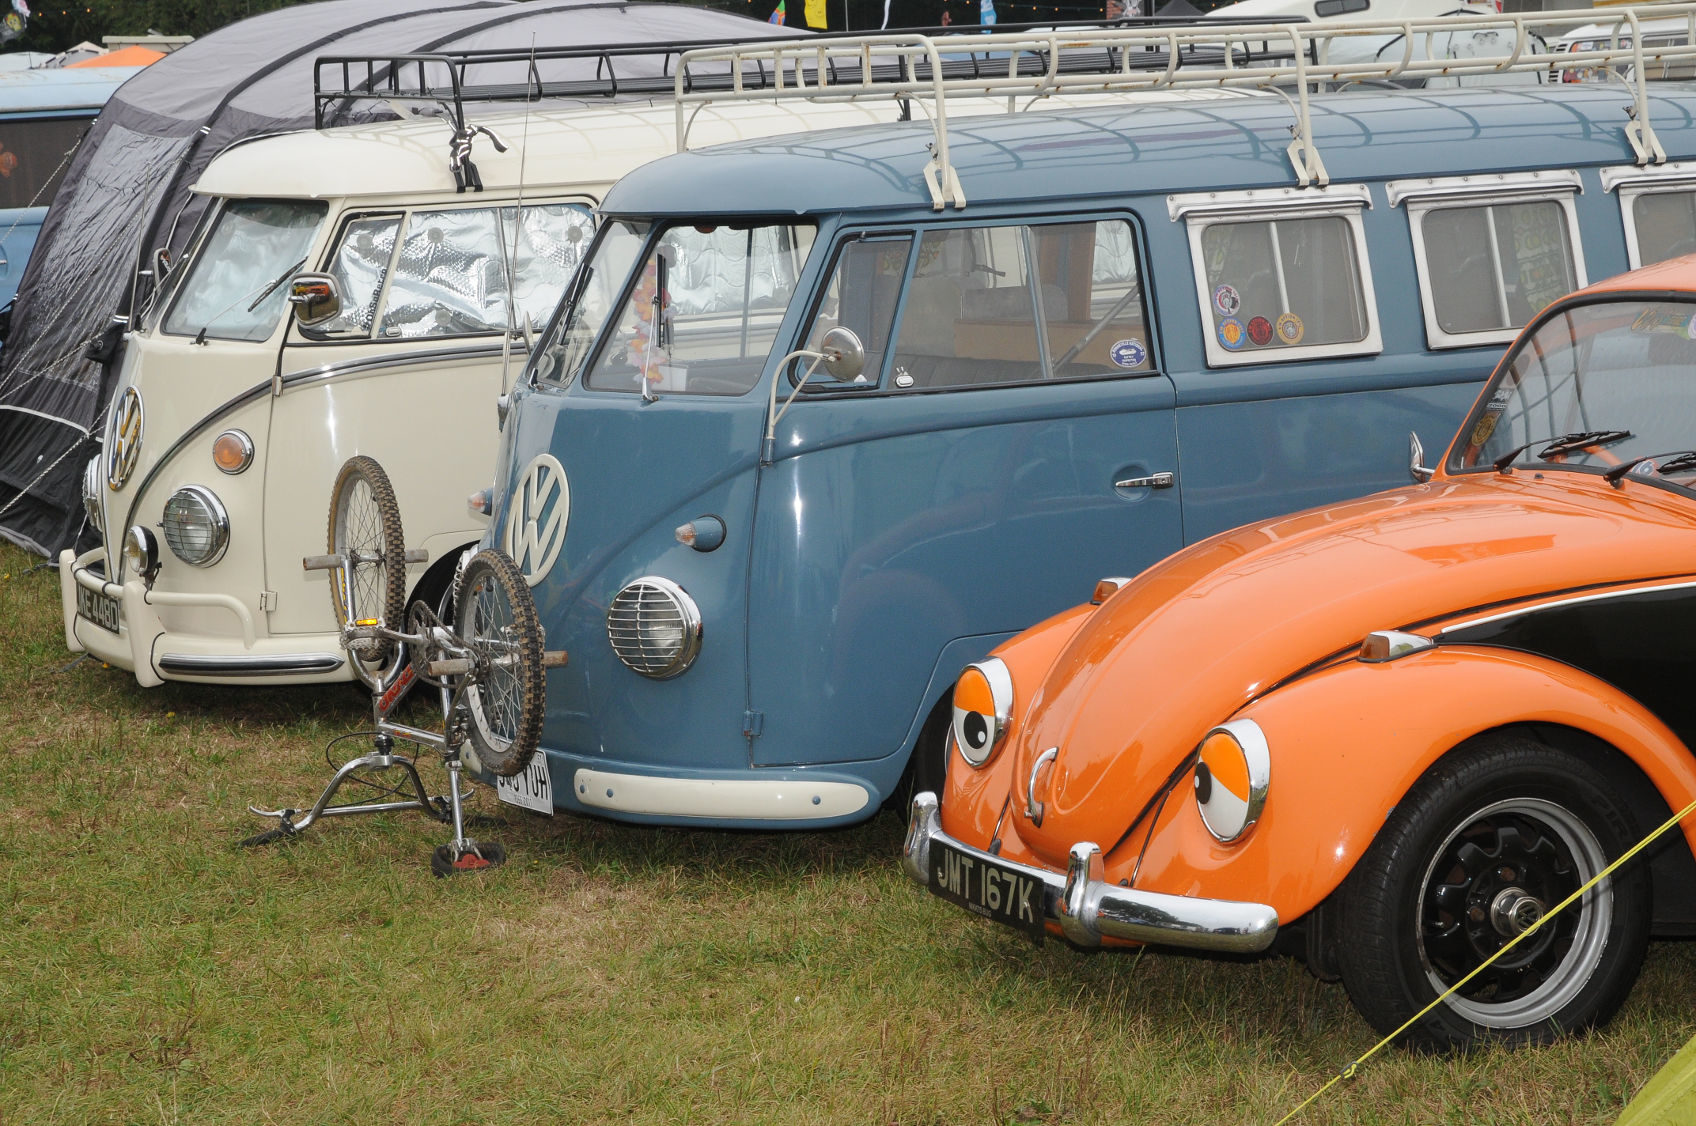 The importance of VW clubs.